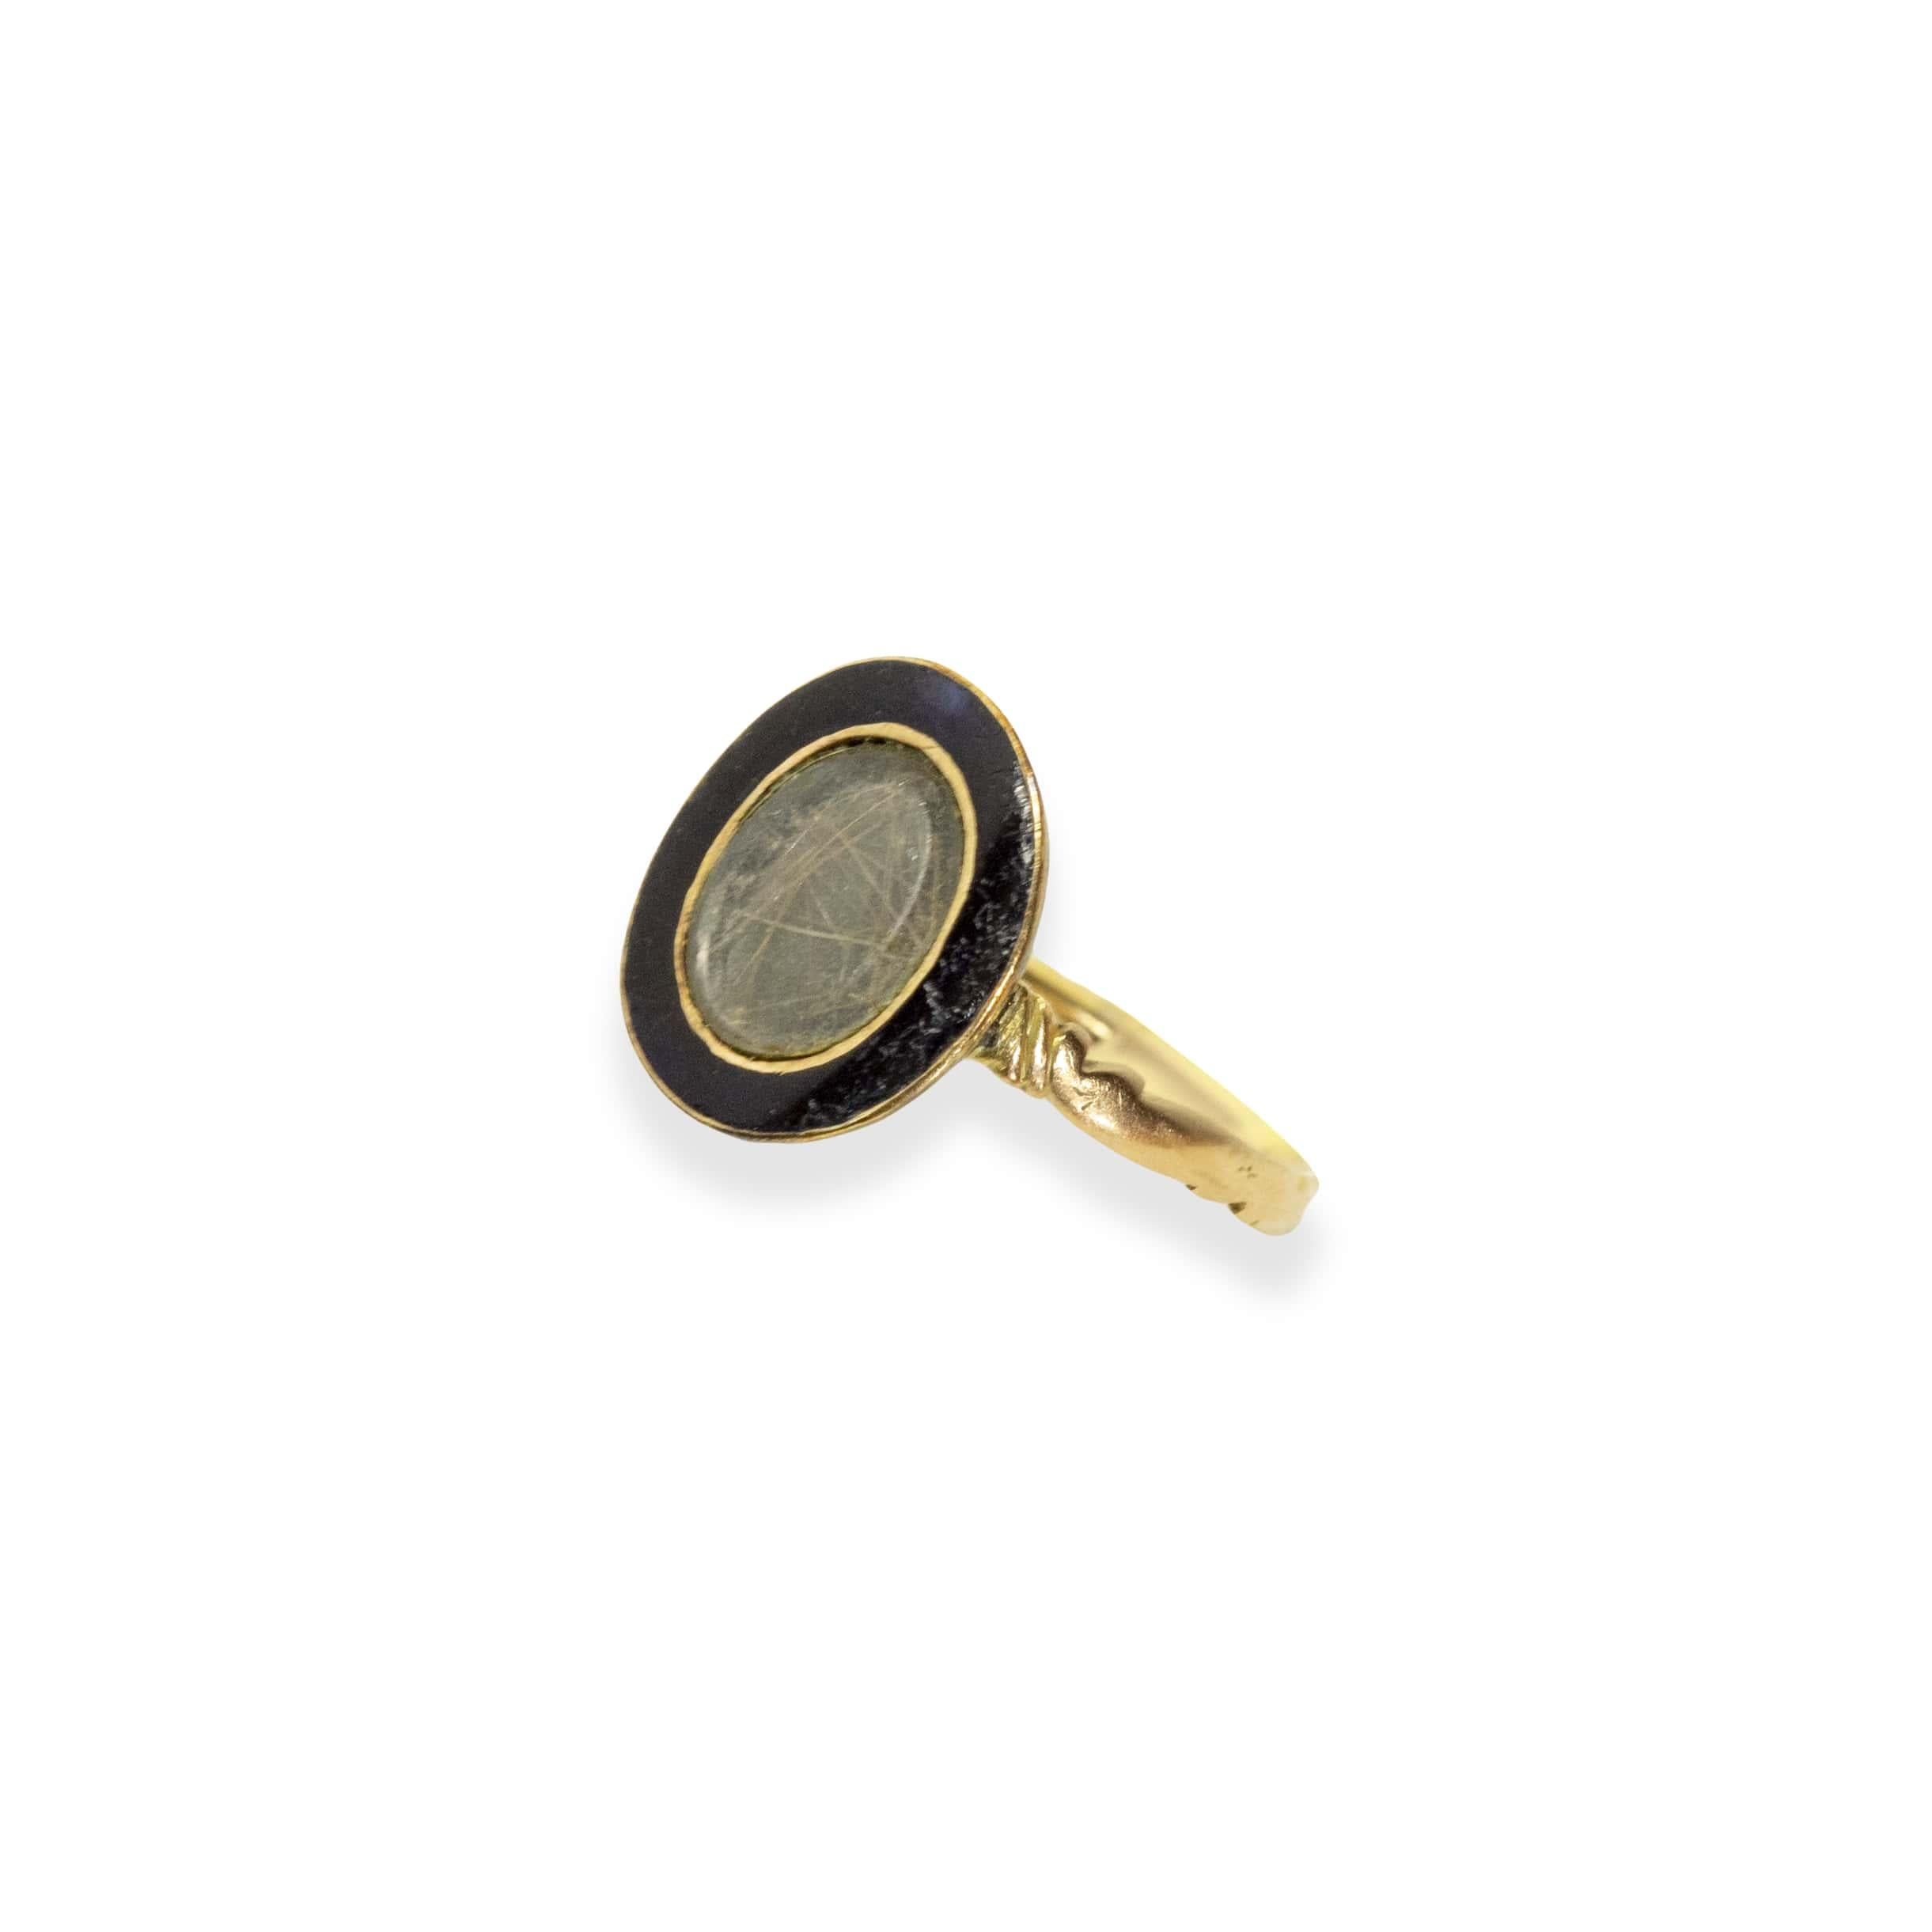 Elegant Georgian mourning ring set in 18k gold. The oval head is set in funereal black enamel which morphs into a very dark blue in strong sunlight. Which surrounds a crystal hair panel with genuine hair inside. This style is quite rare. This ring